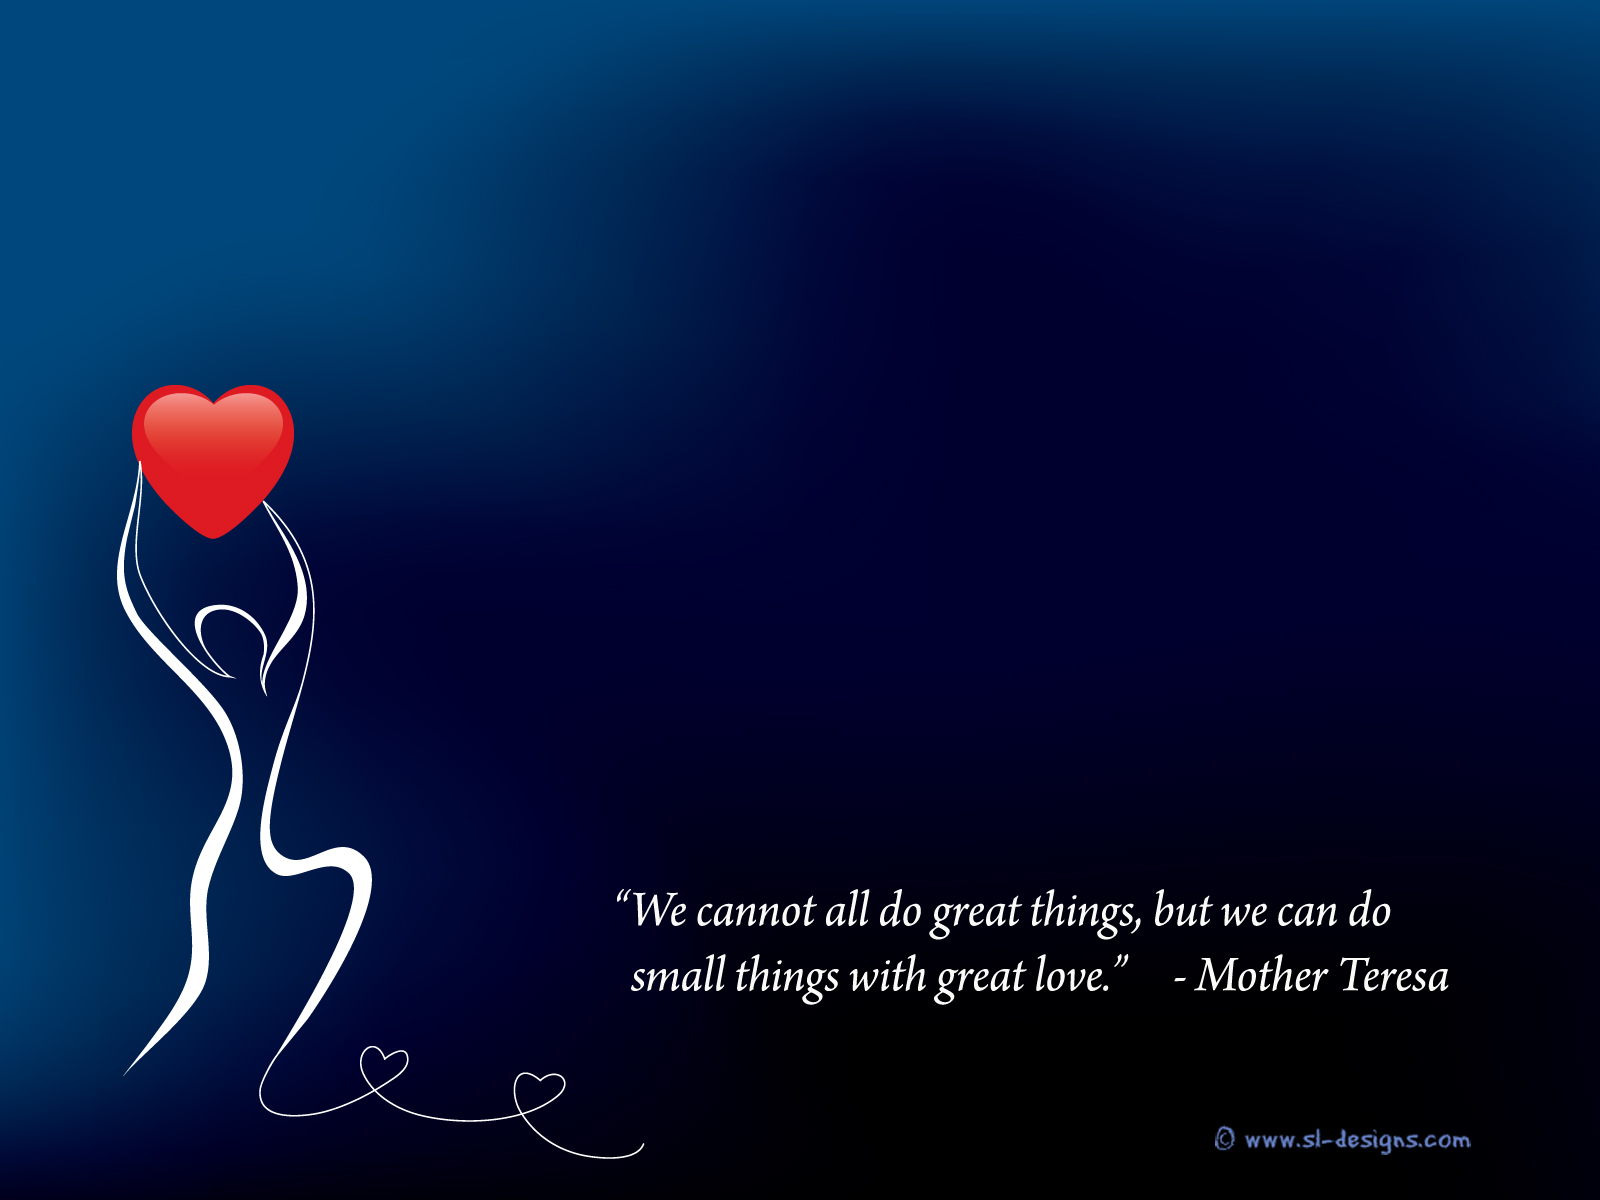 With Great Love Mother Teresa Quotes On Wallpaper Sl Designs